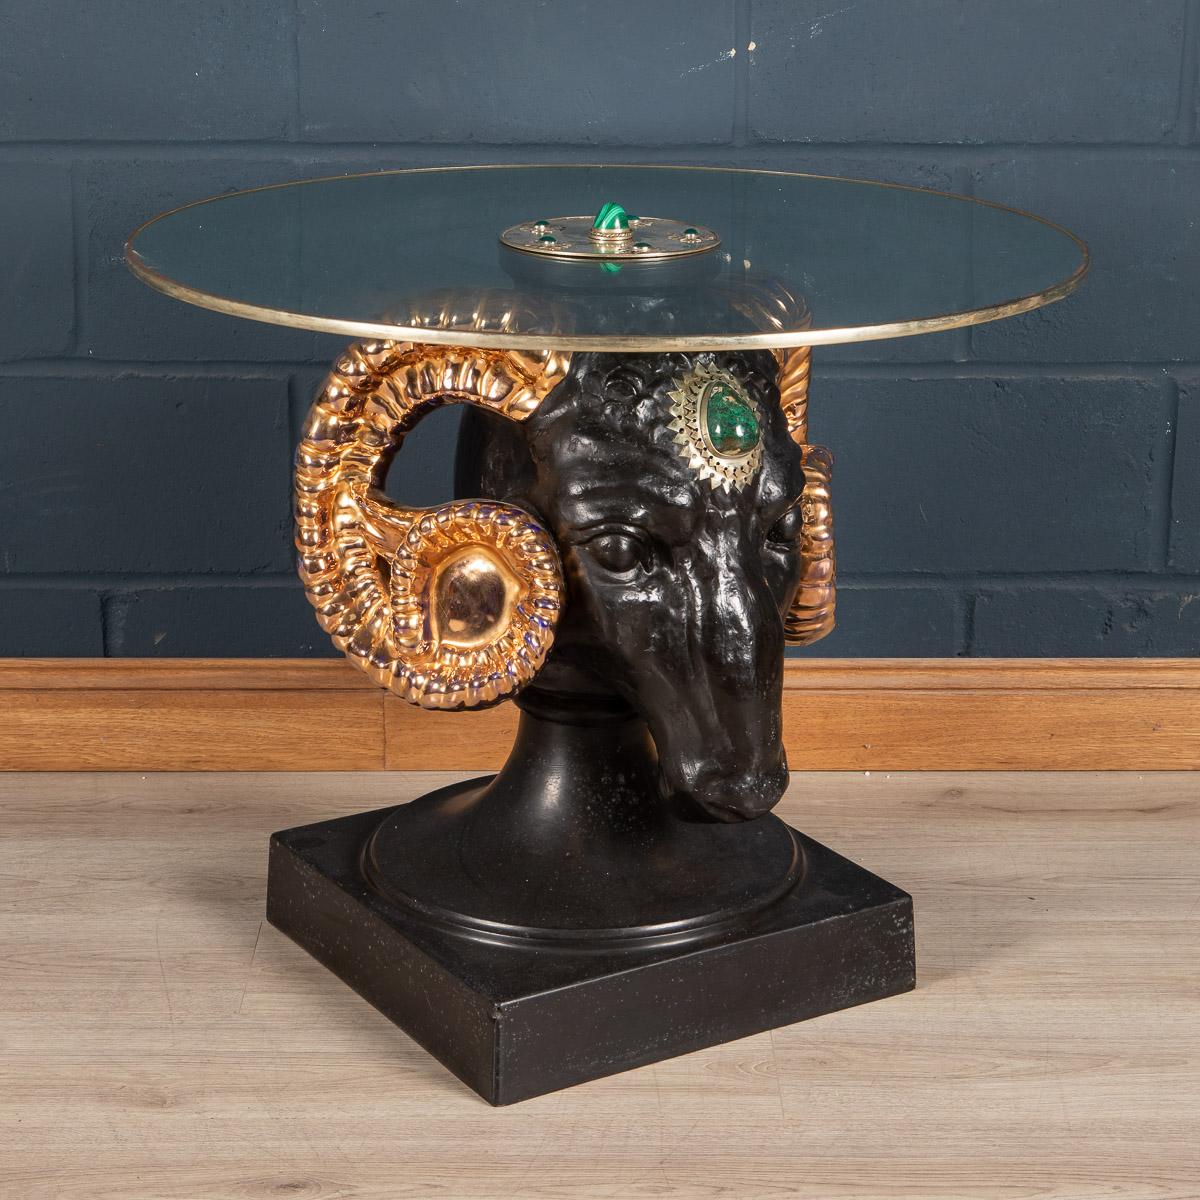 A coffee table by Anthony Redmile, London, circa 1970. The base of the table fashioned from composite painted head of a ram, the central circular plaque inlaid with hardstone cabochons signed Redmile, London to the centre. Anthony Redmile burst into